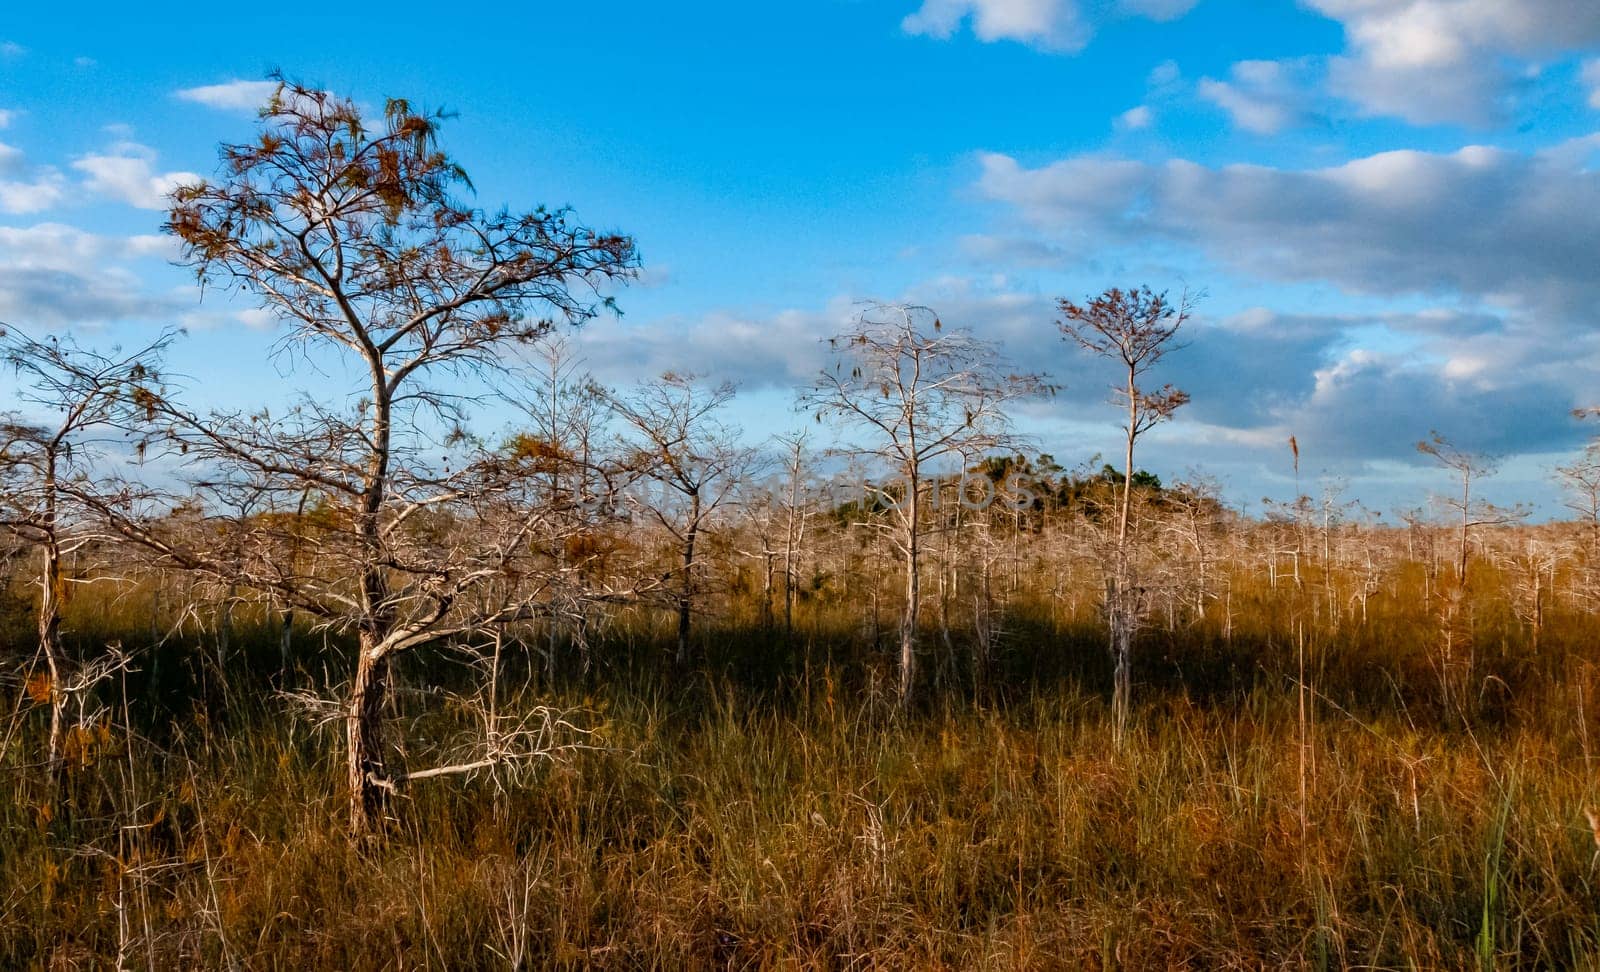 Swamp landscape, Swamp trees and other wild vegetation in autumn, Florida USA